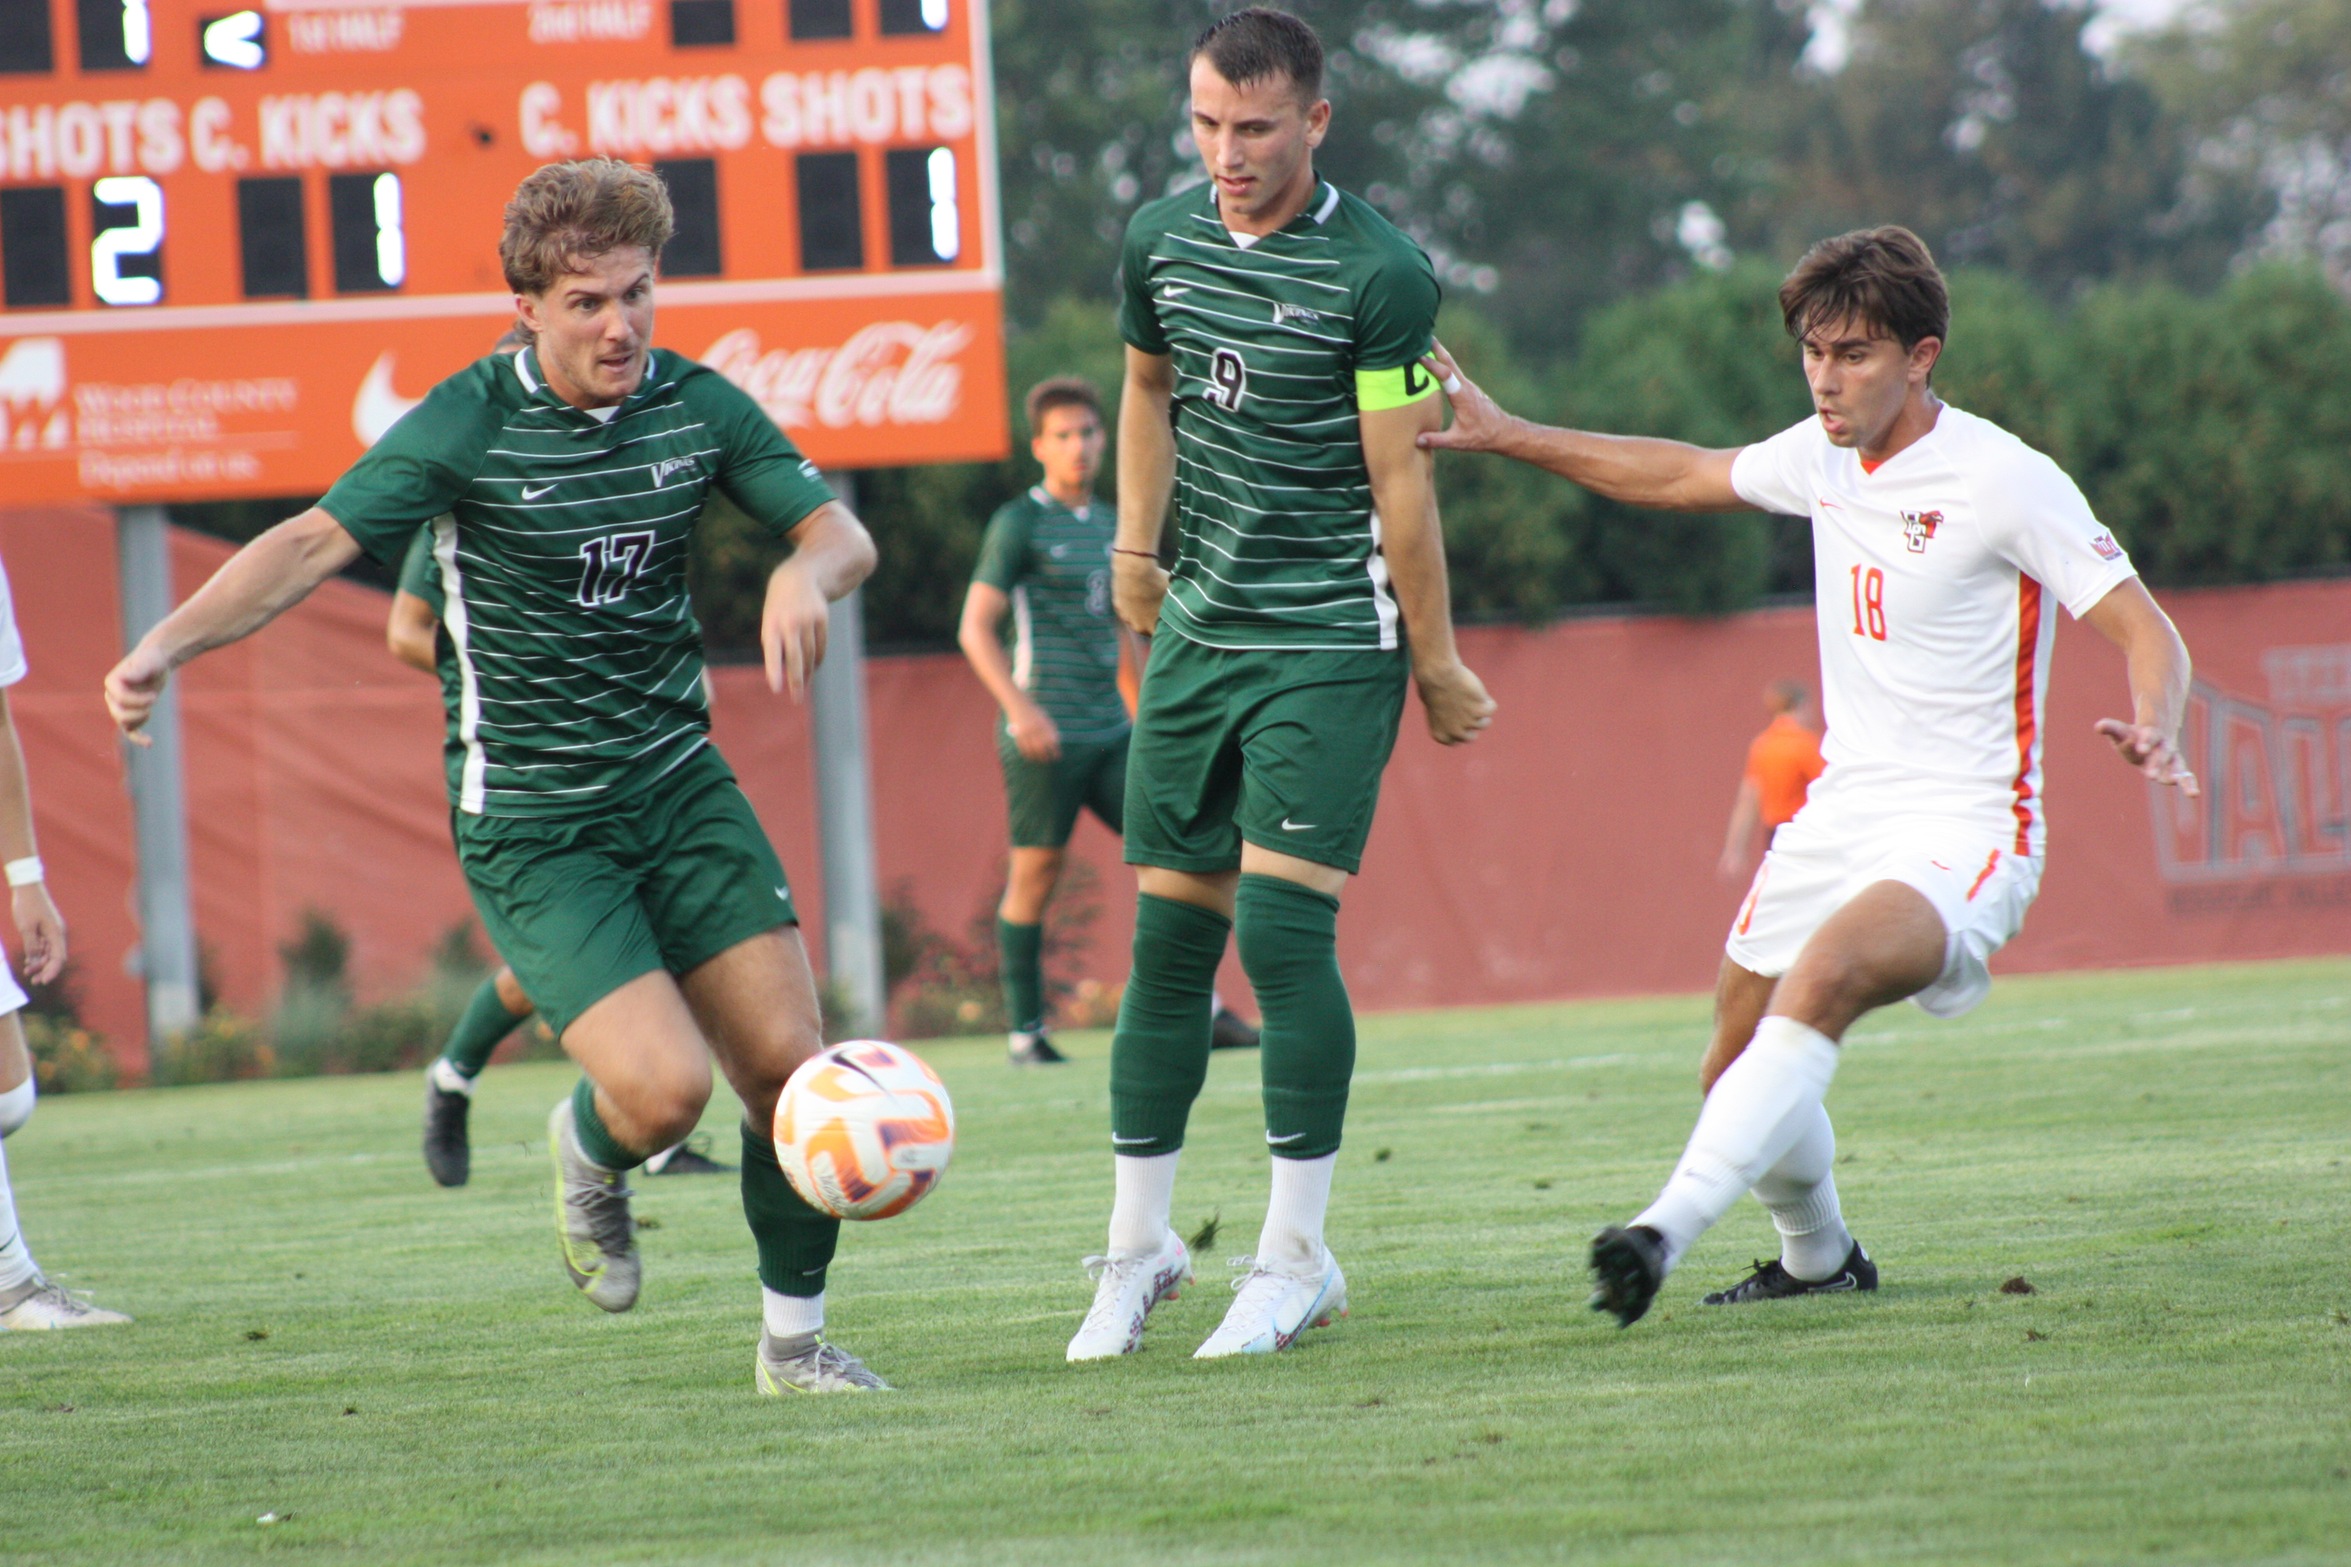 Cleveland State Men's Soccer Drops Season Opener to Bowling Green, 3-2